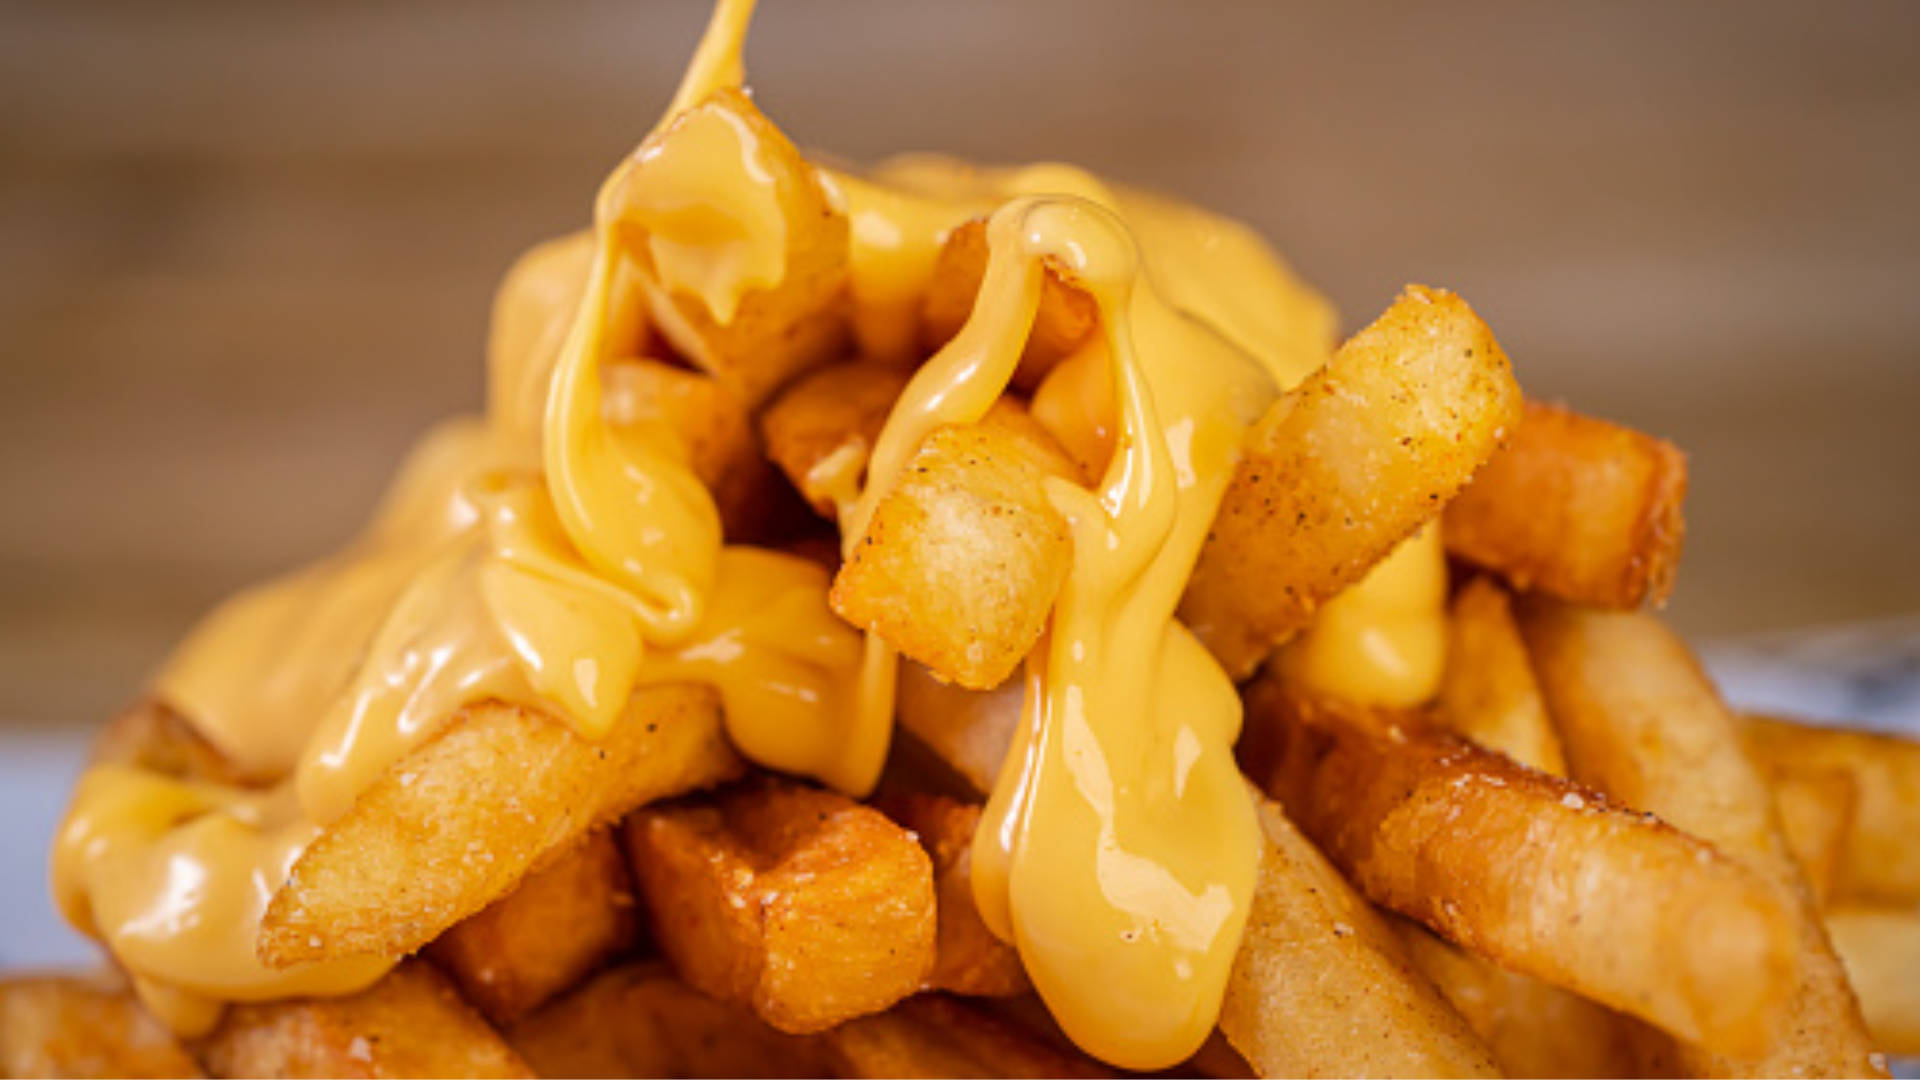 Cheesy French Fries